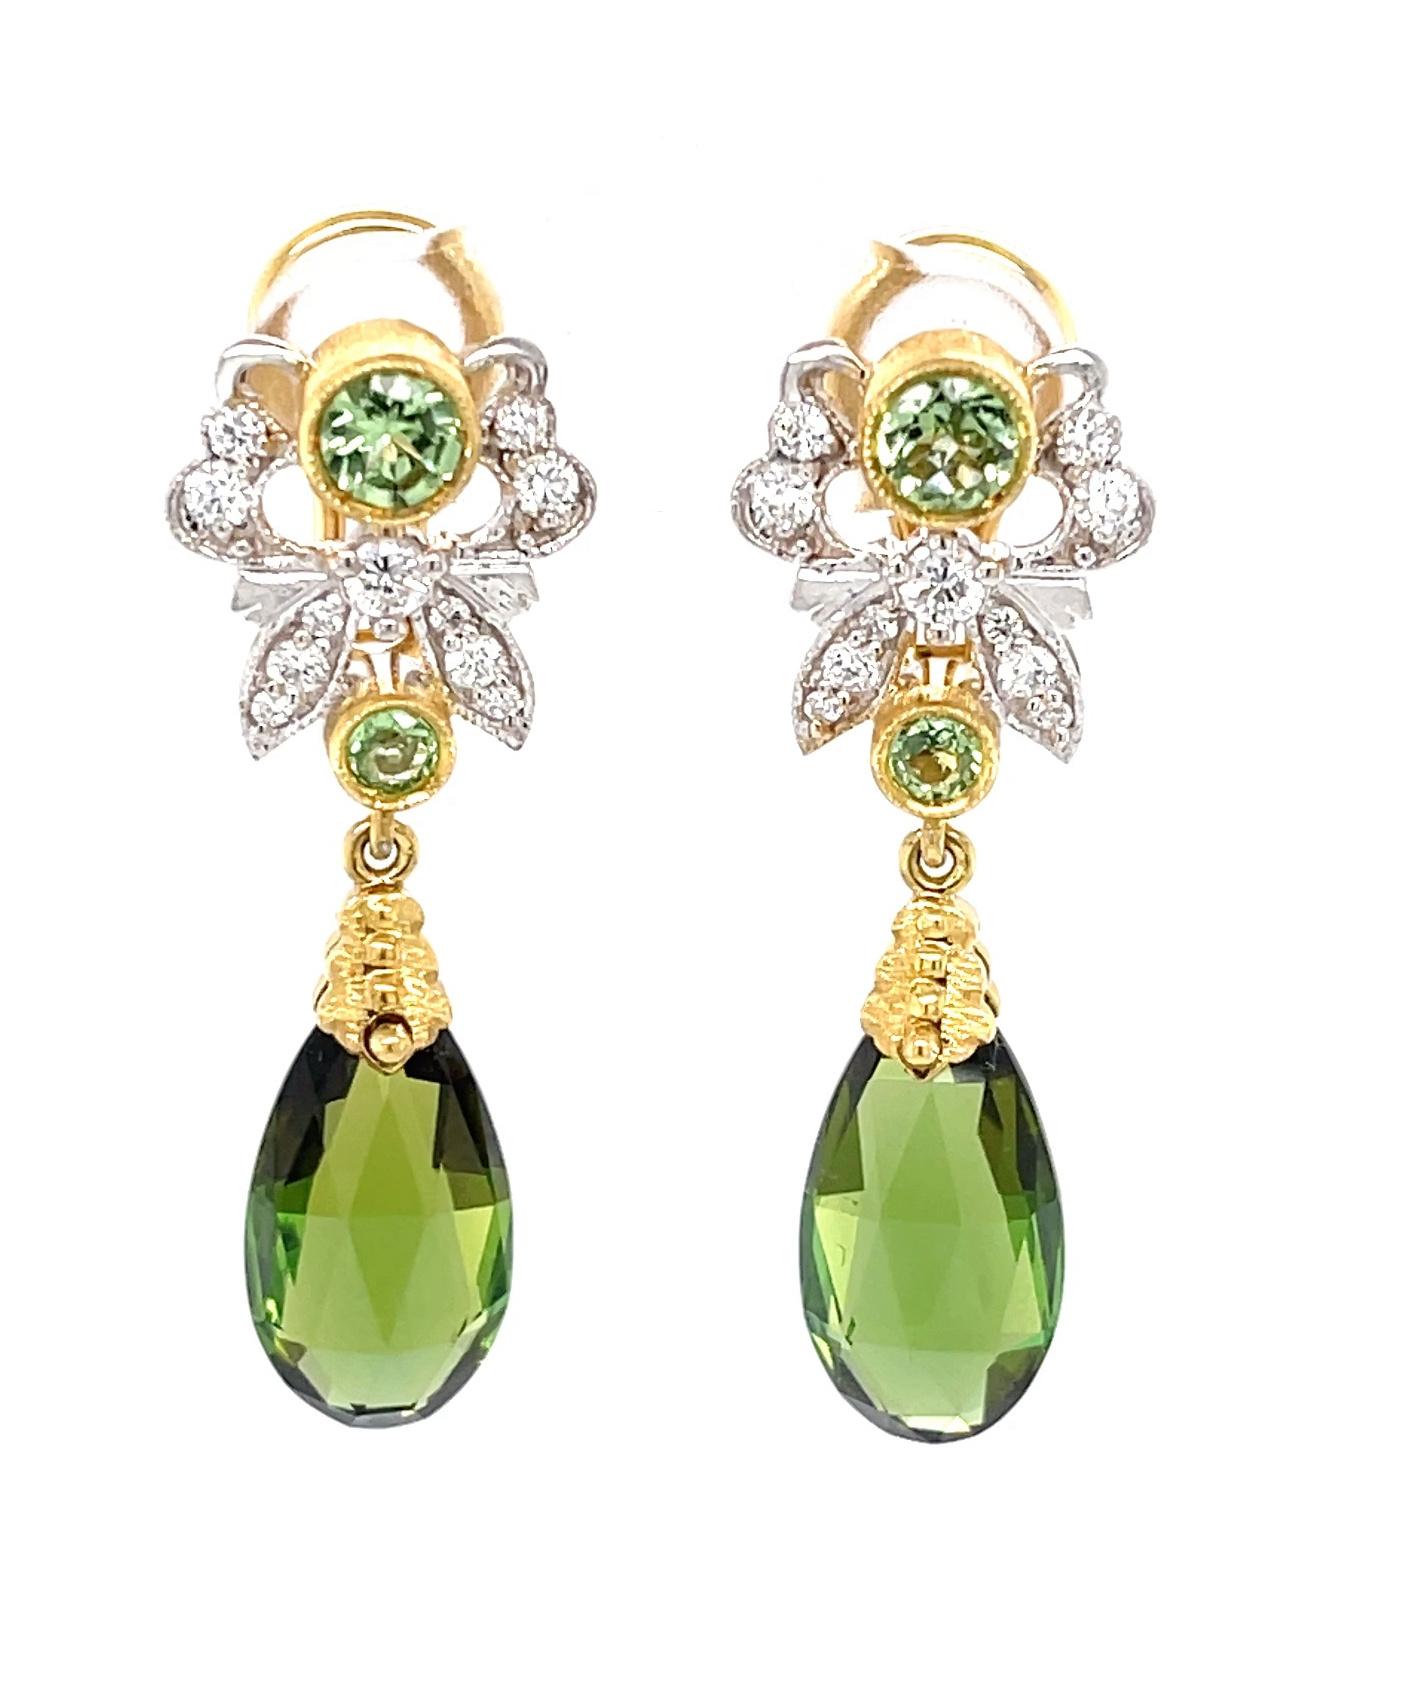 These pretty dangle earrings feature gem-quality green tourmalines that have been faceted as elegant pendeloques! Set in 18k yellow gold, these feminine drops are so elegant and sophisticated, set with bright, sparkling green tsavorite garnets and